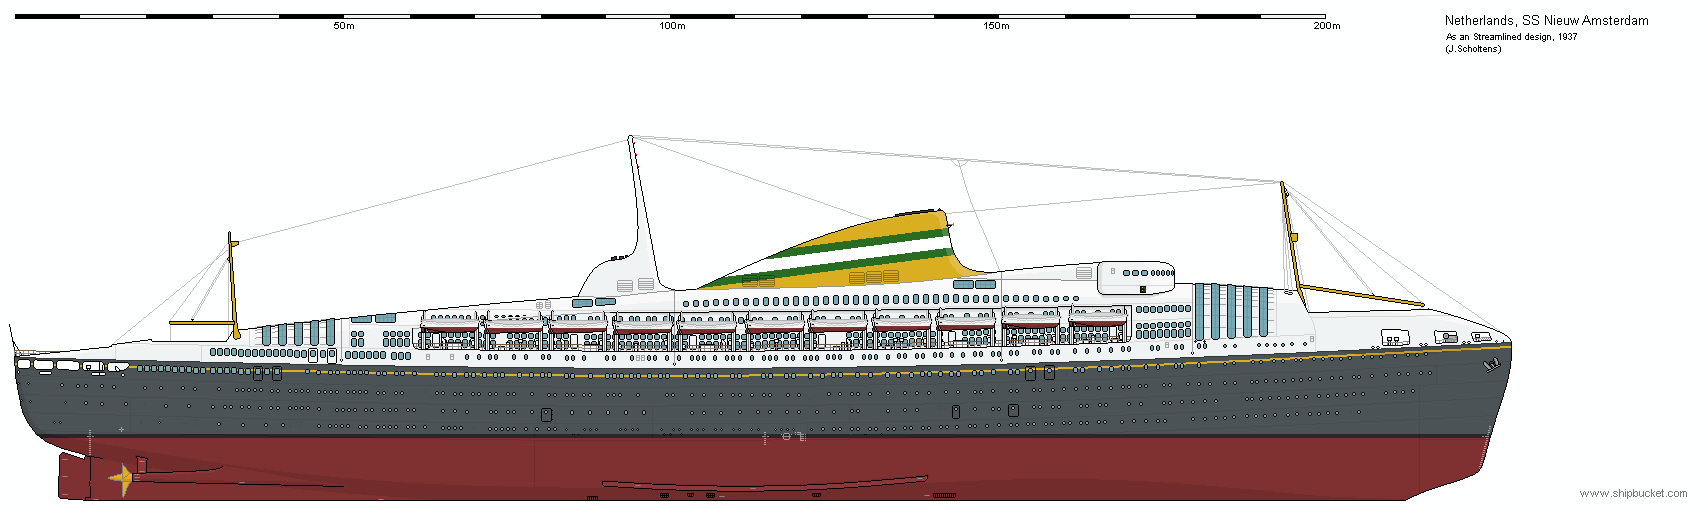 Streamlined SS Nieuw Amsterdam 1937.png